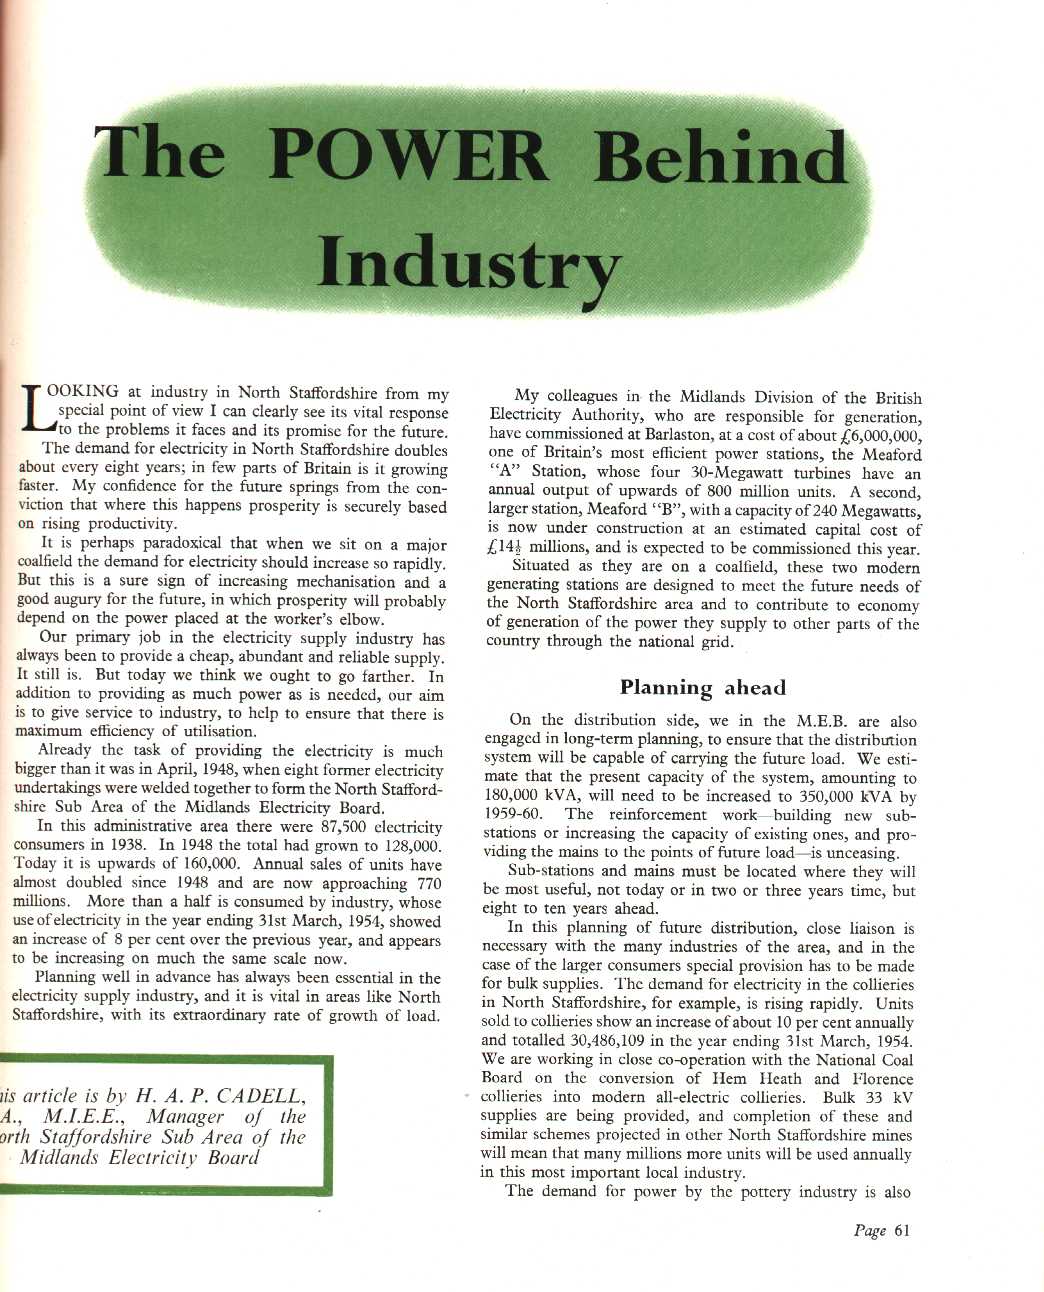 The power behind Industry" Article on electricity